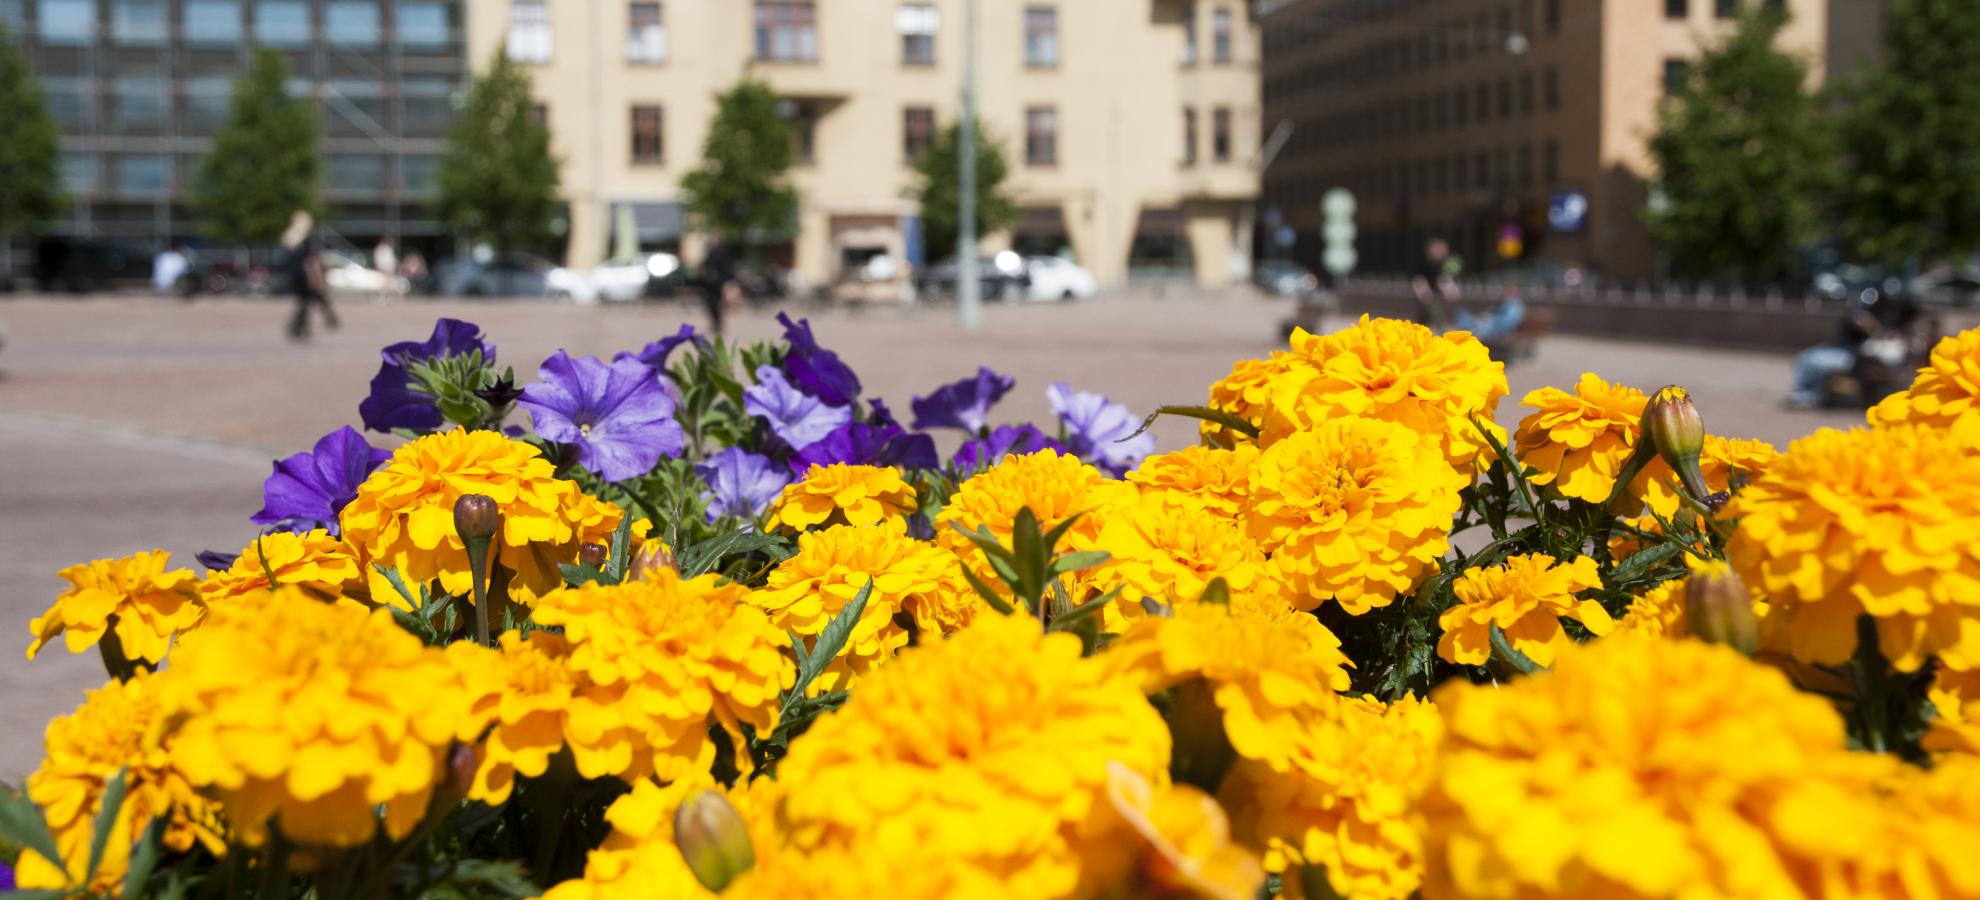 With bright yellow and purple flowers close up in the foreground, Kasarmitori and some of the surrounding buildings stand out of focus in the background on a sunny day.